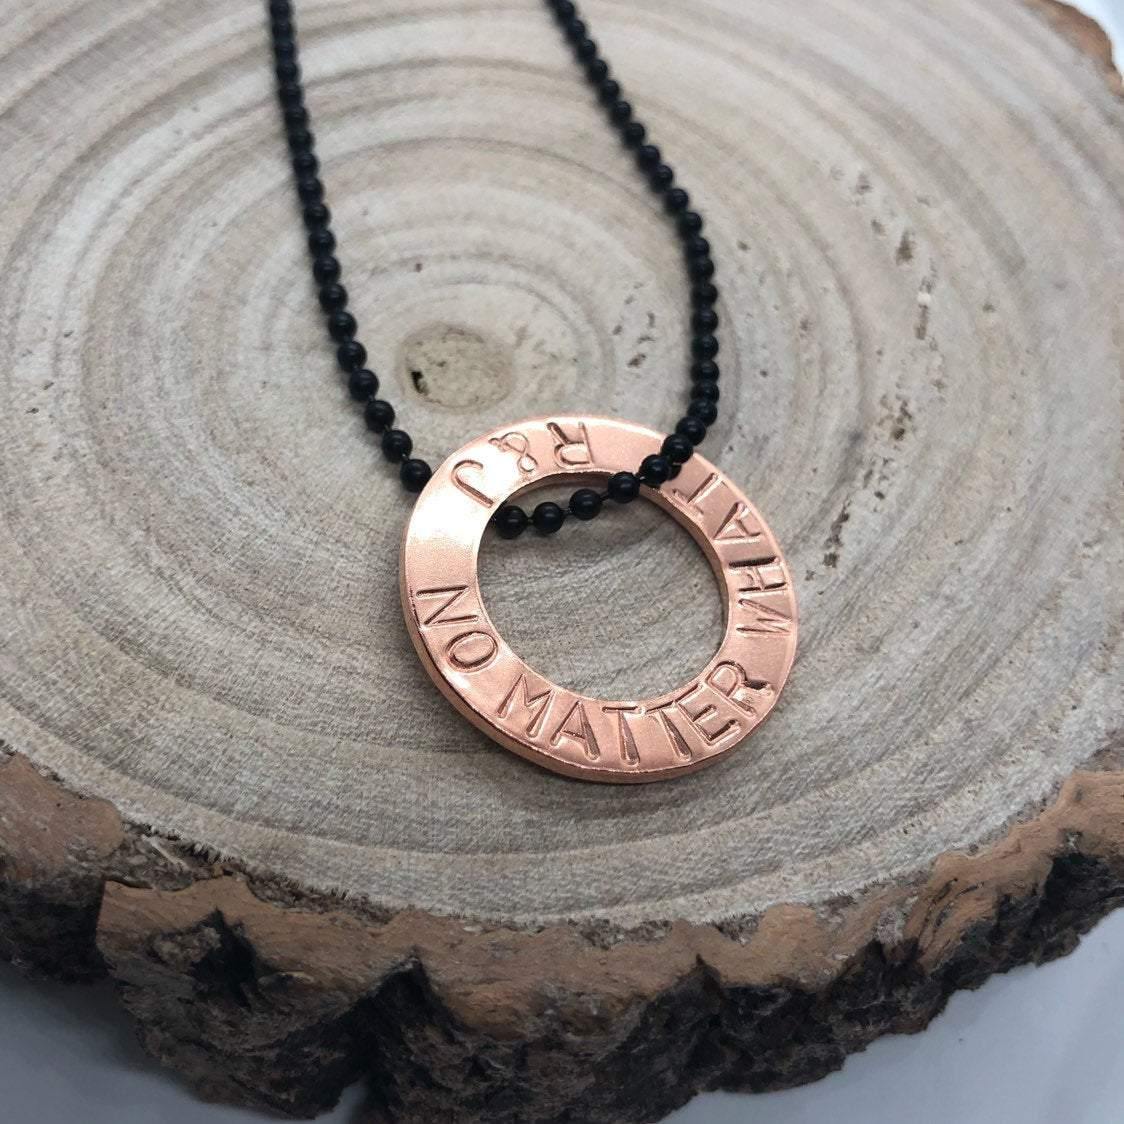 Men's personalised necklace, name necklace, mens jewellery, copper jewelry - The Little Stamping Co.